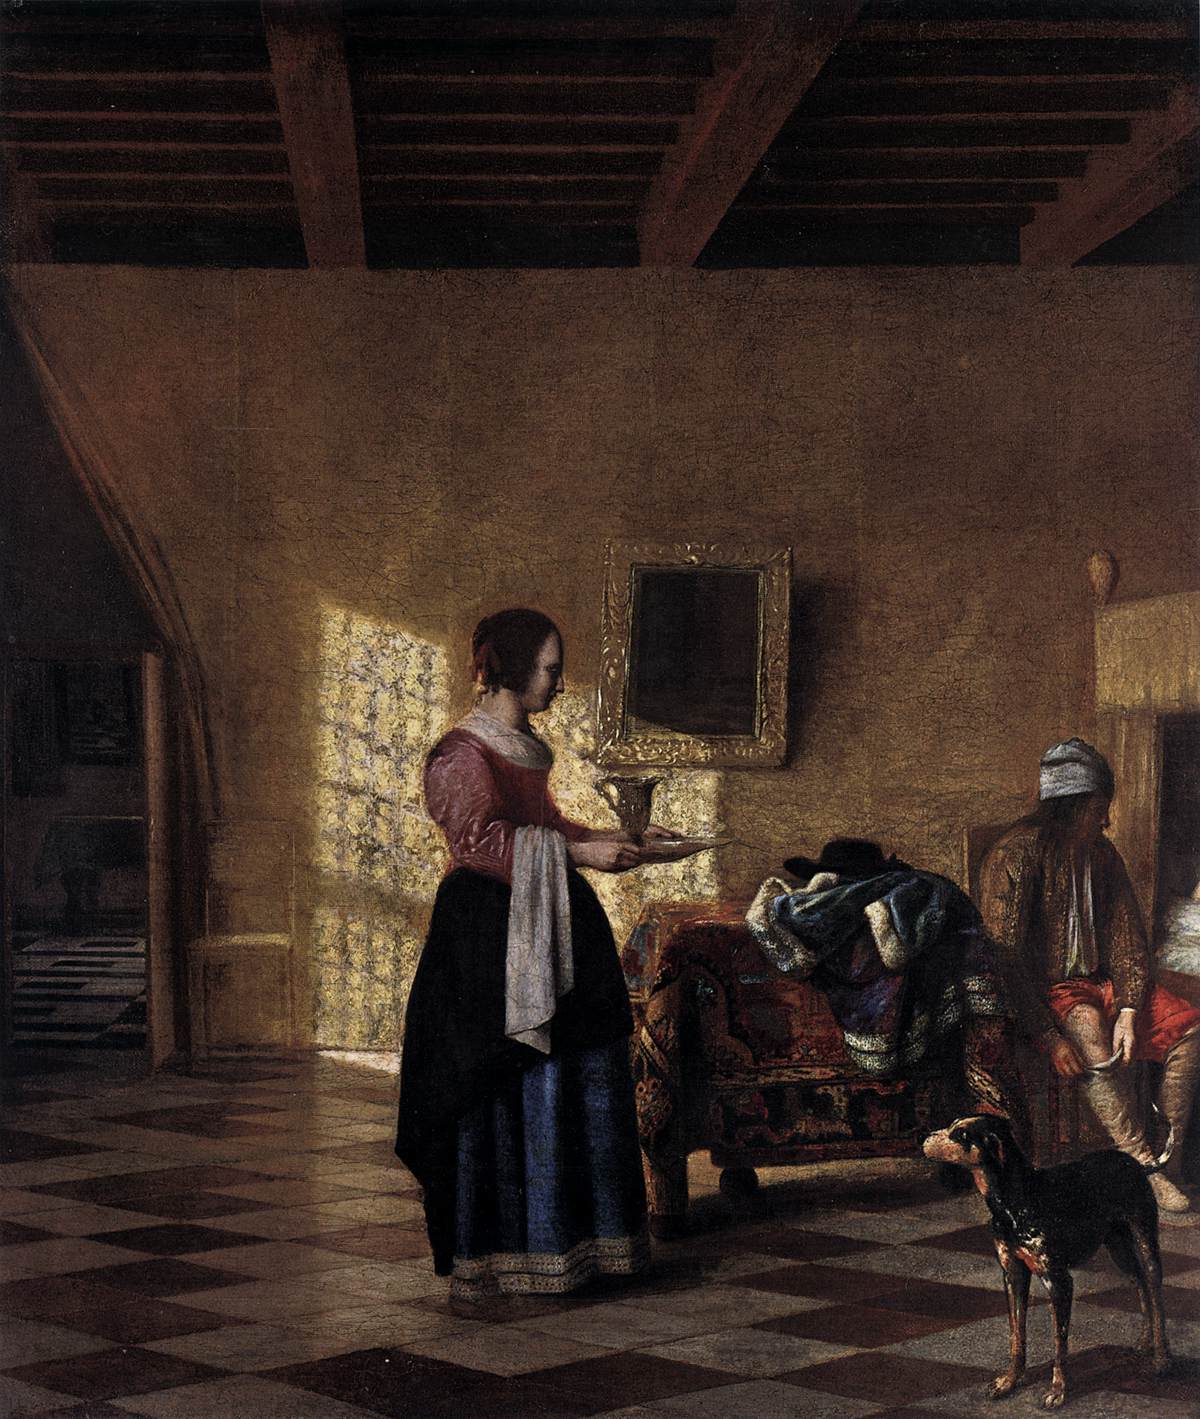 Woman with a Water Jug and a Man Next to a Bed